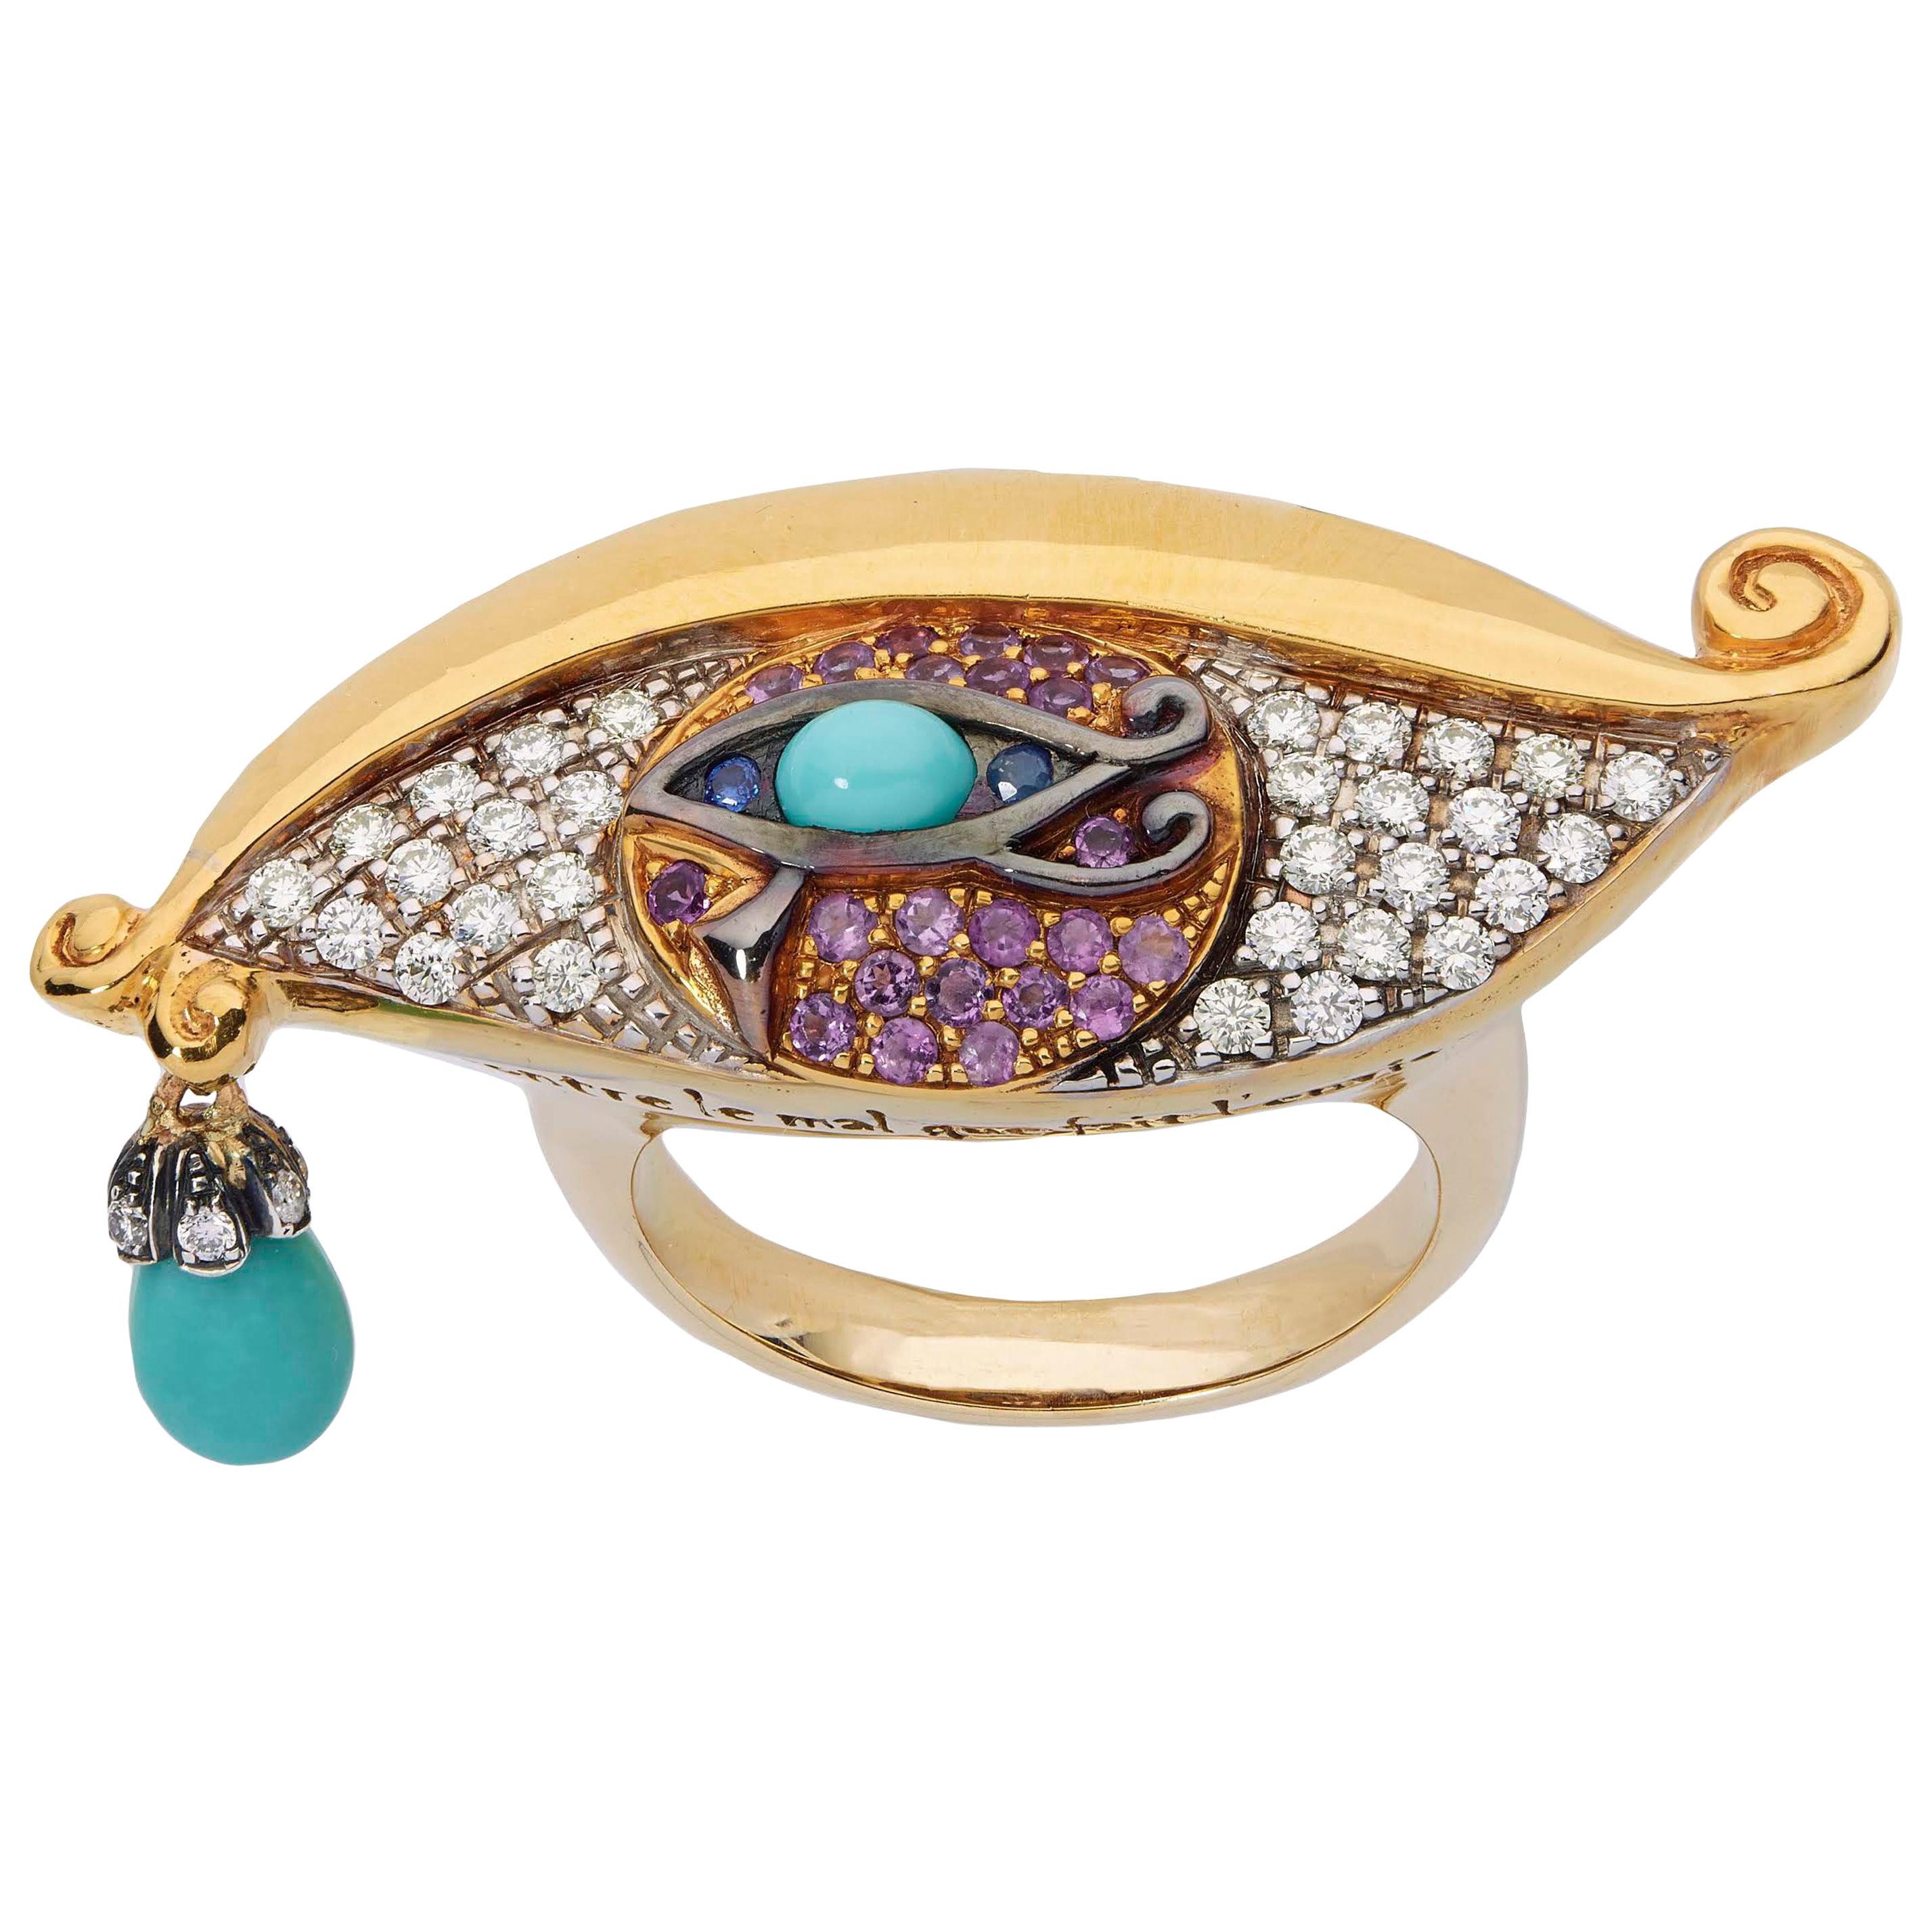 Sylvie Corbelin Eye Of Horus Ring in Gold and Silver with Diamonds 